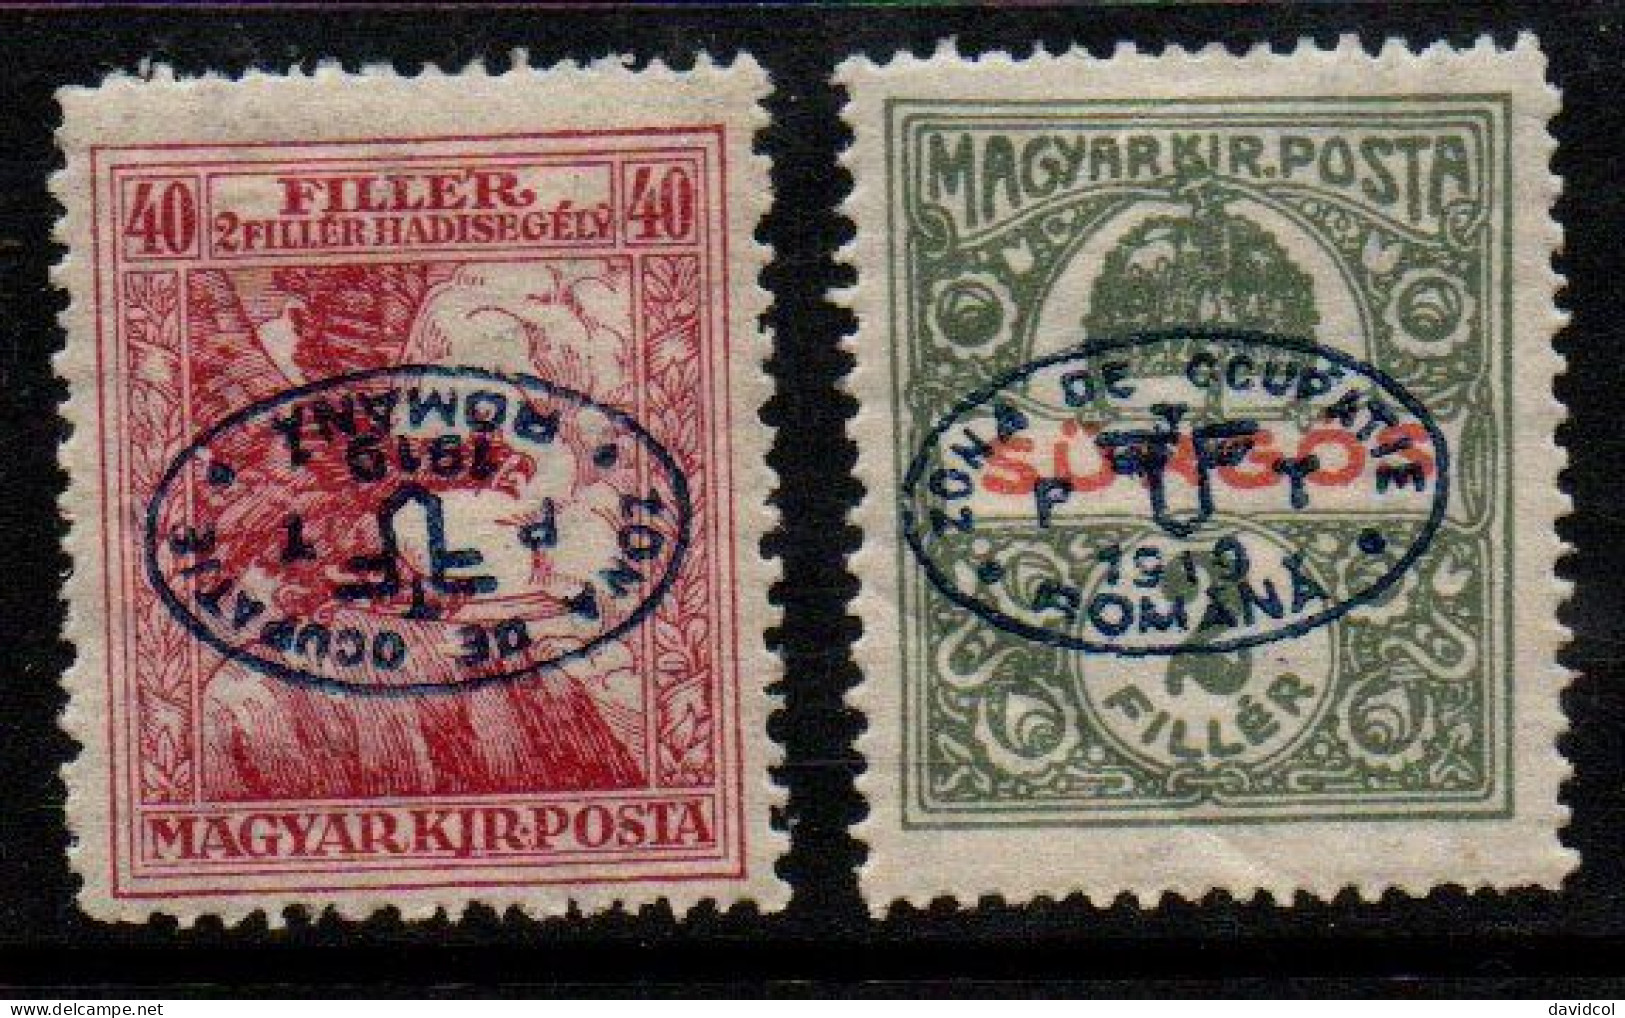 2666C - HUNGARY - 1919 - SC#: 2NB3//2NE1 - FIRST DEBRECEN ISSUE - MH -ONE INVERTED-SOLD AS IS - Debreczen